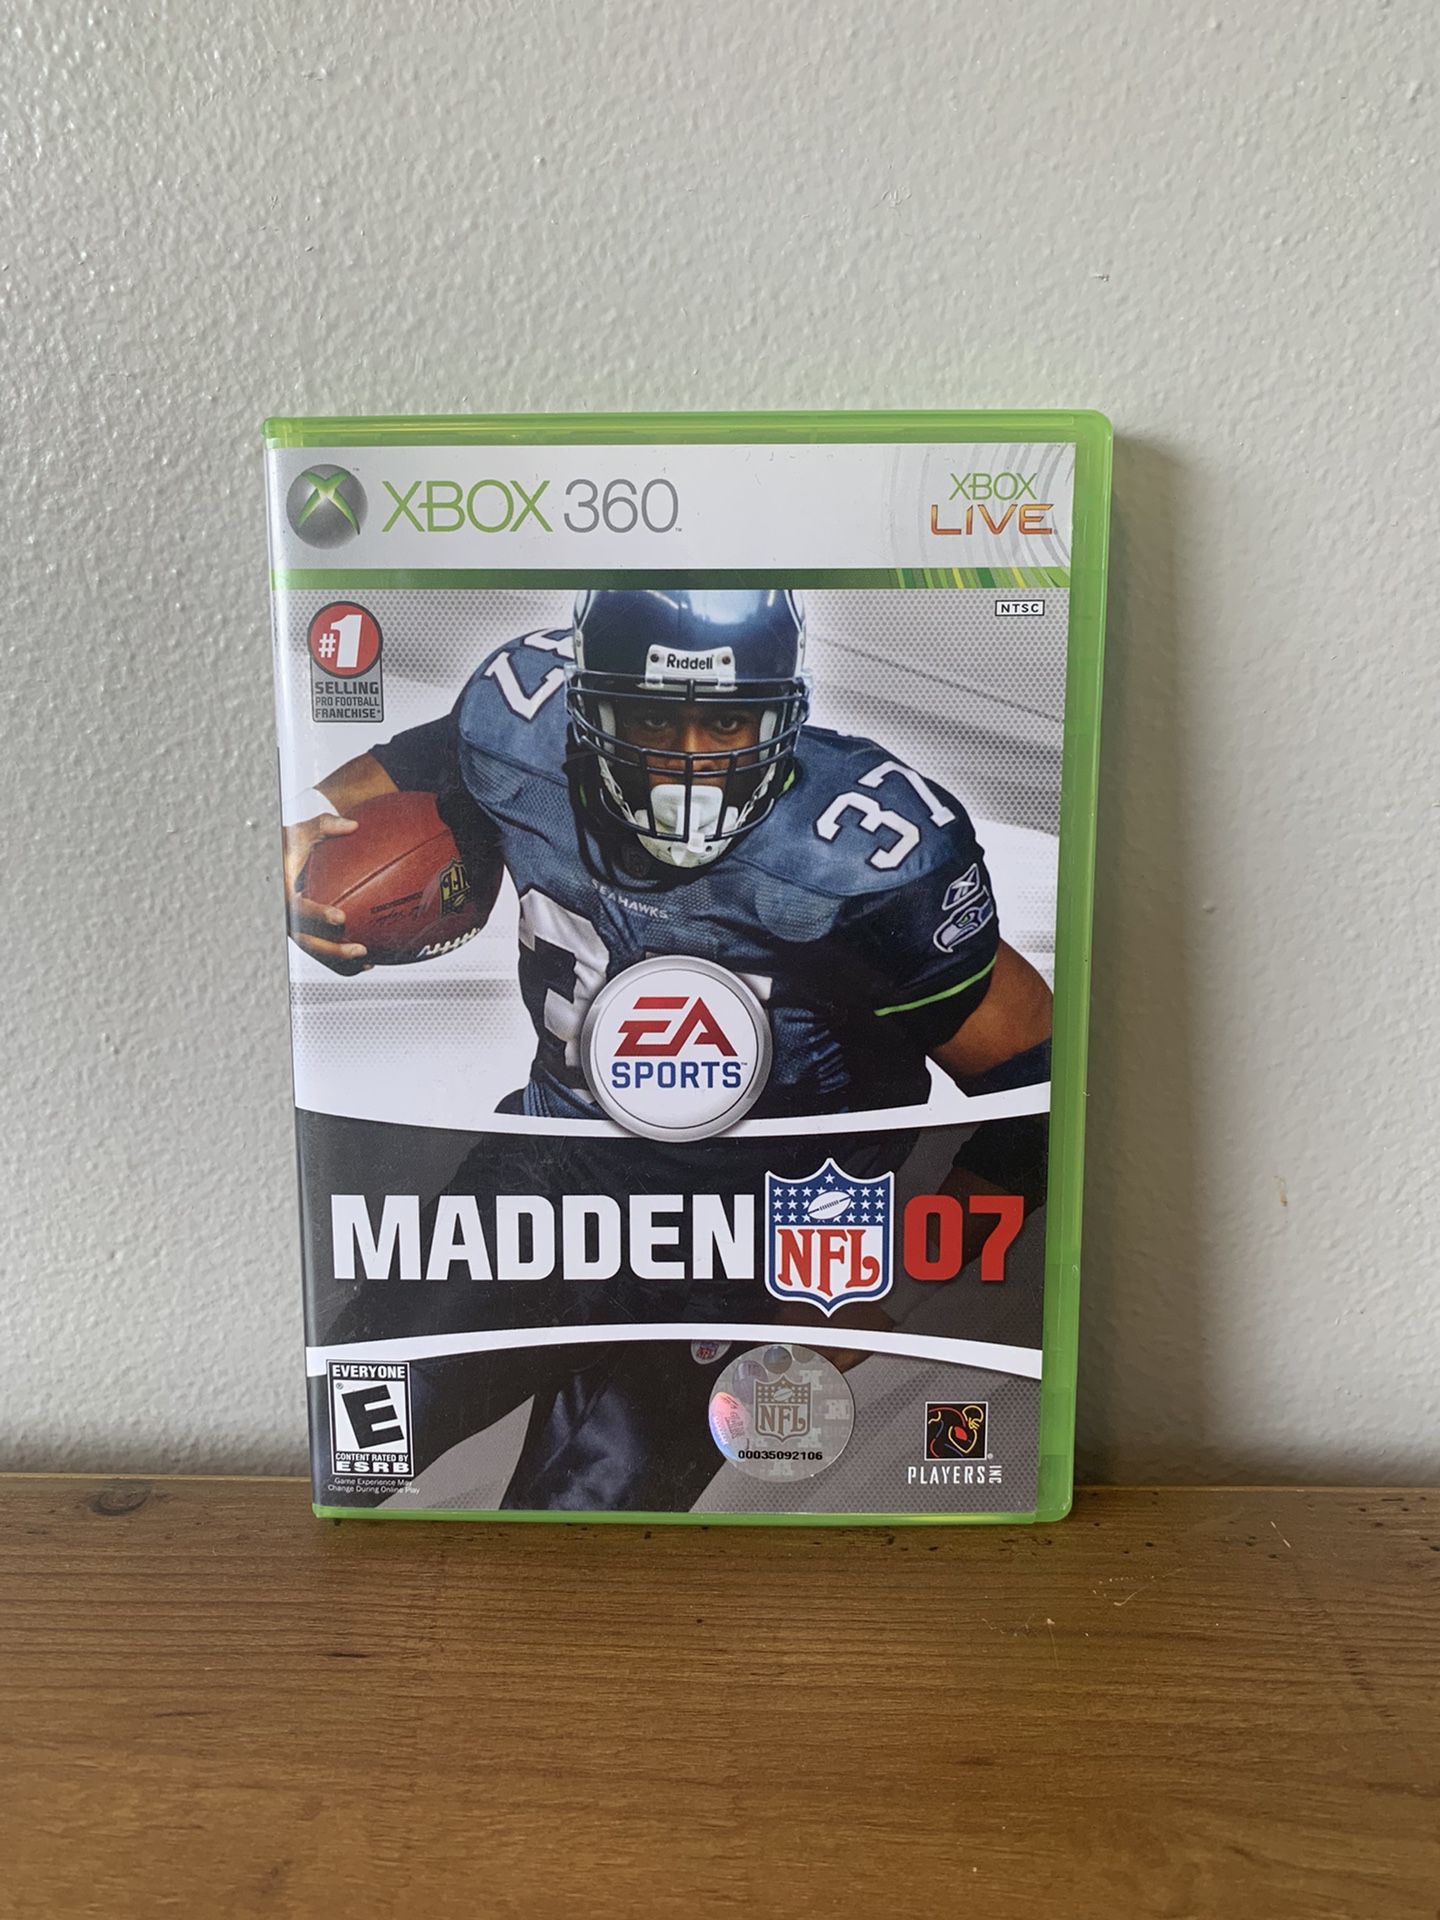 Madden NFL 07 - Complete w/ Manual - Great Condition